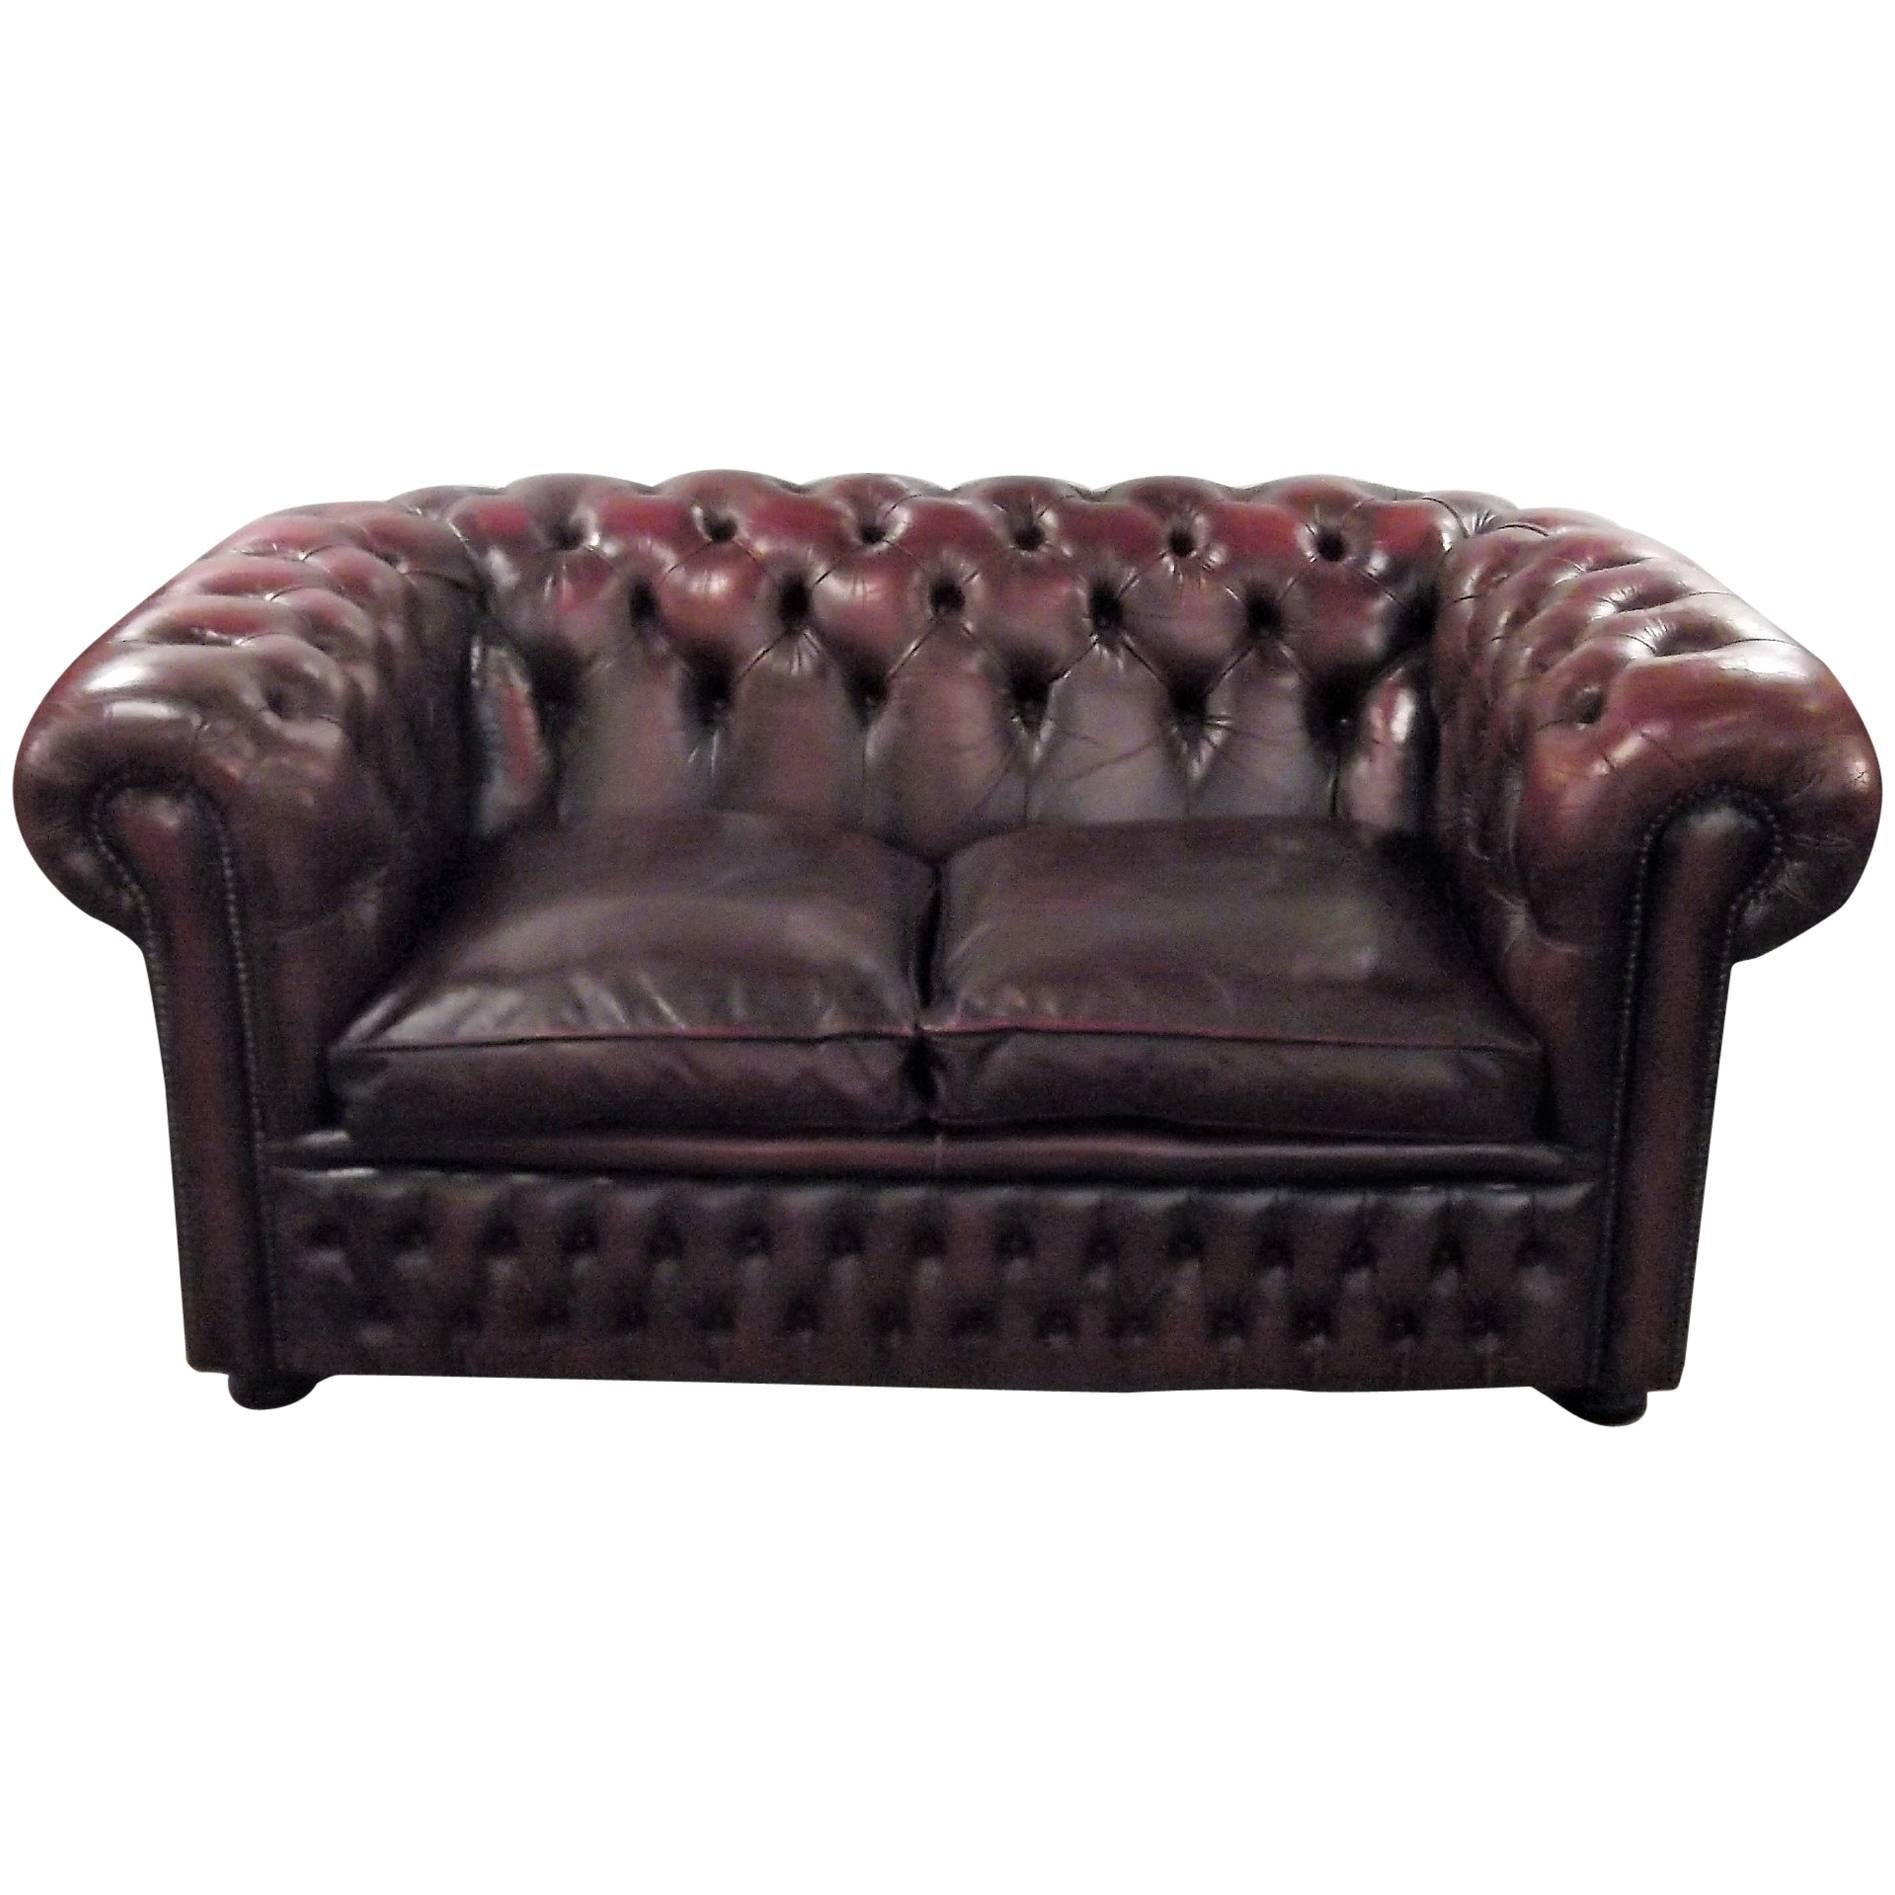 English Cordovan Leather Chesterfield Loveseat